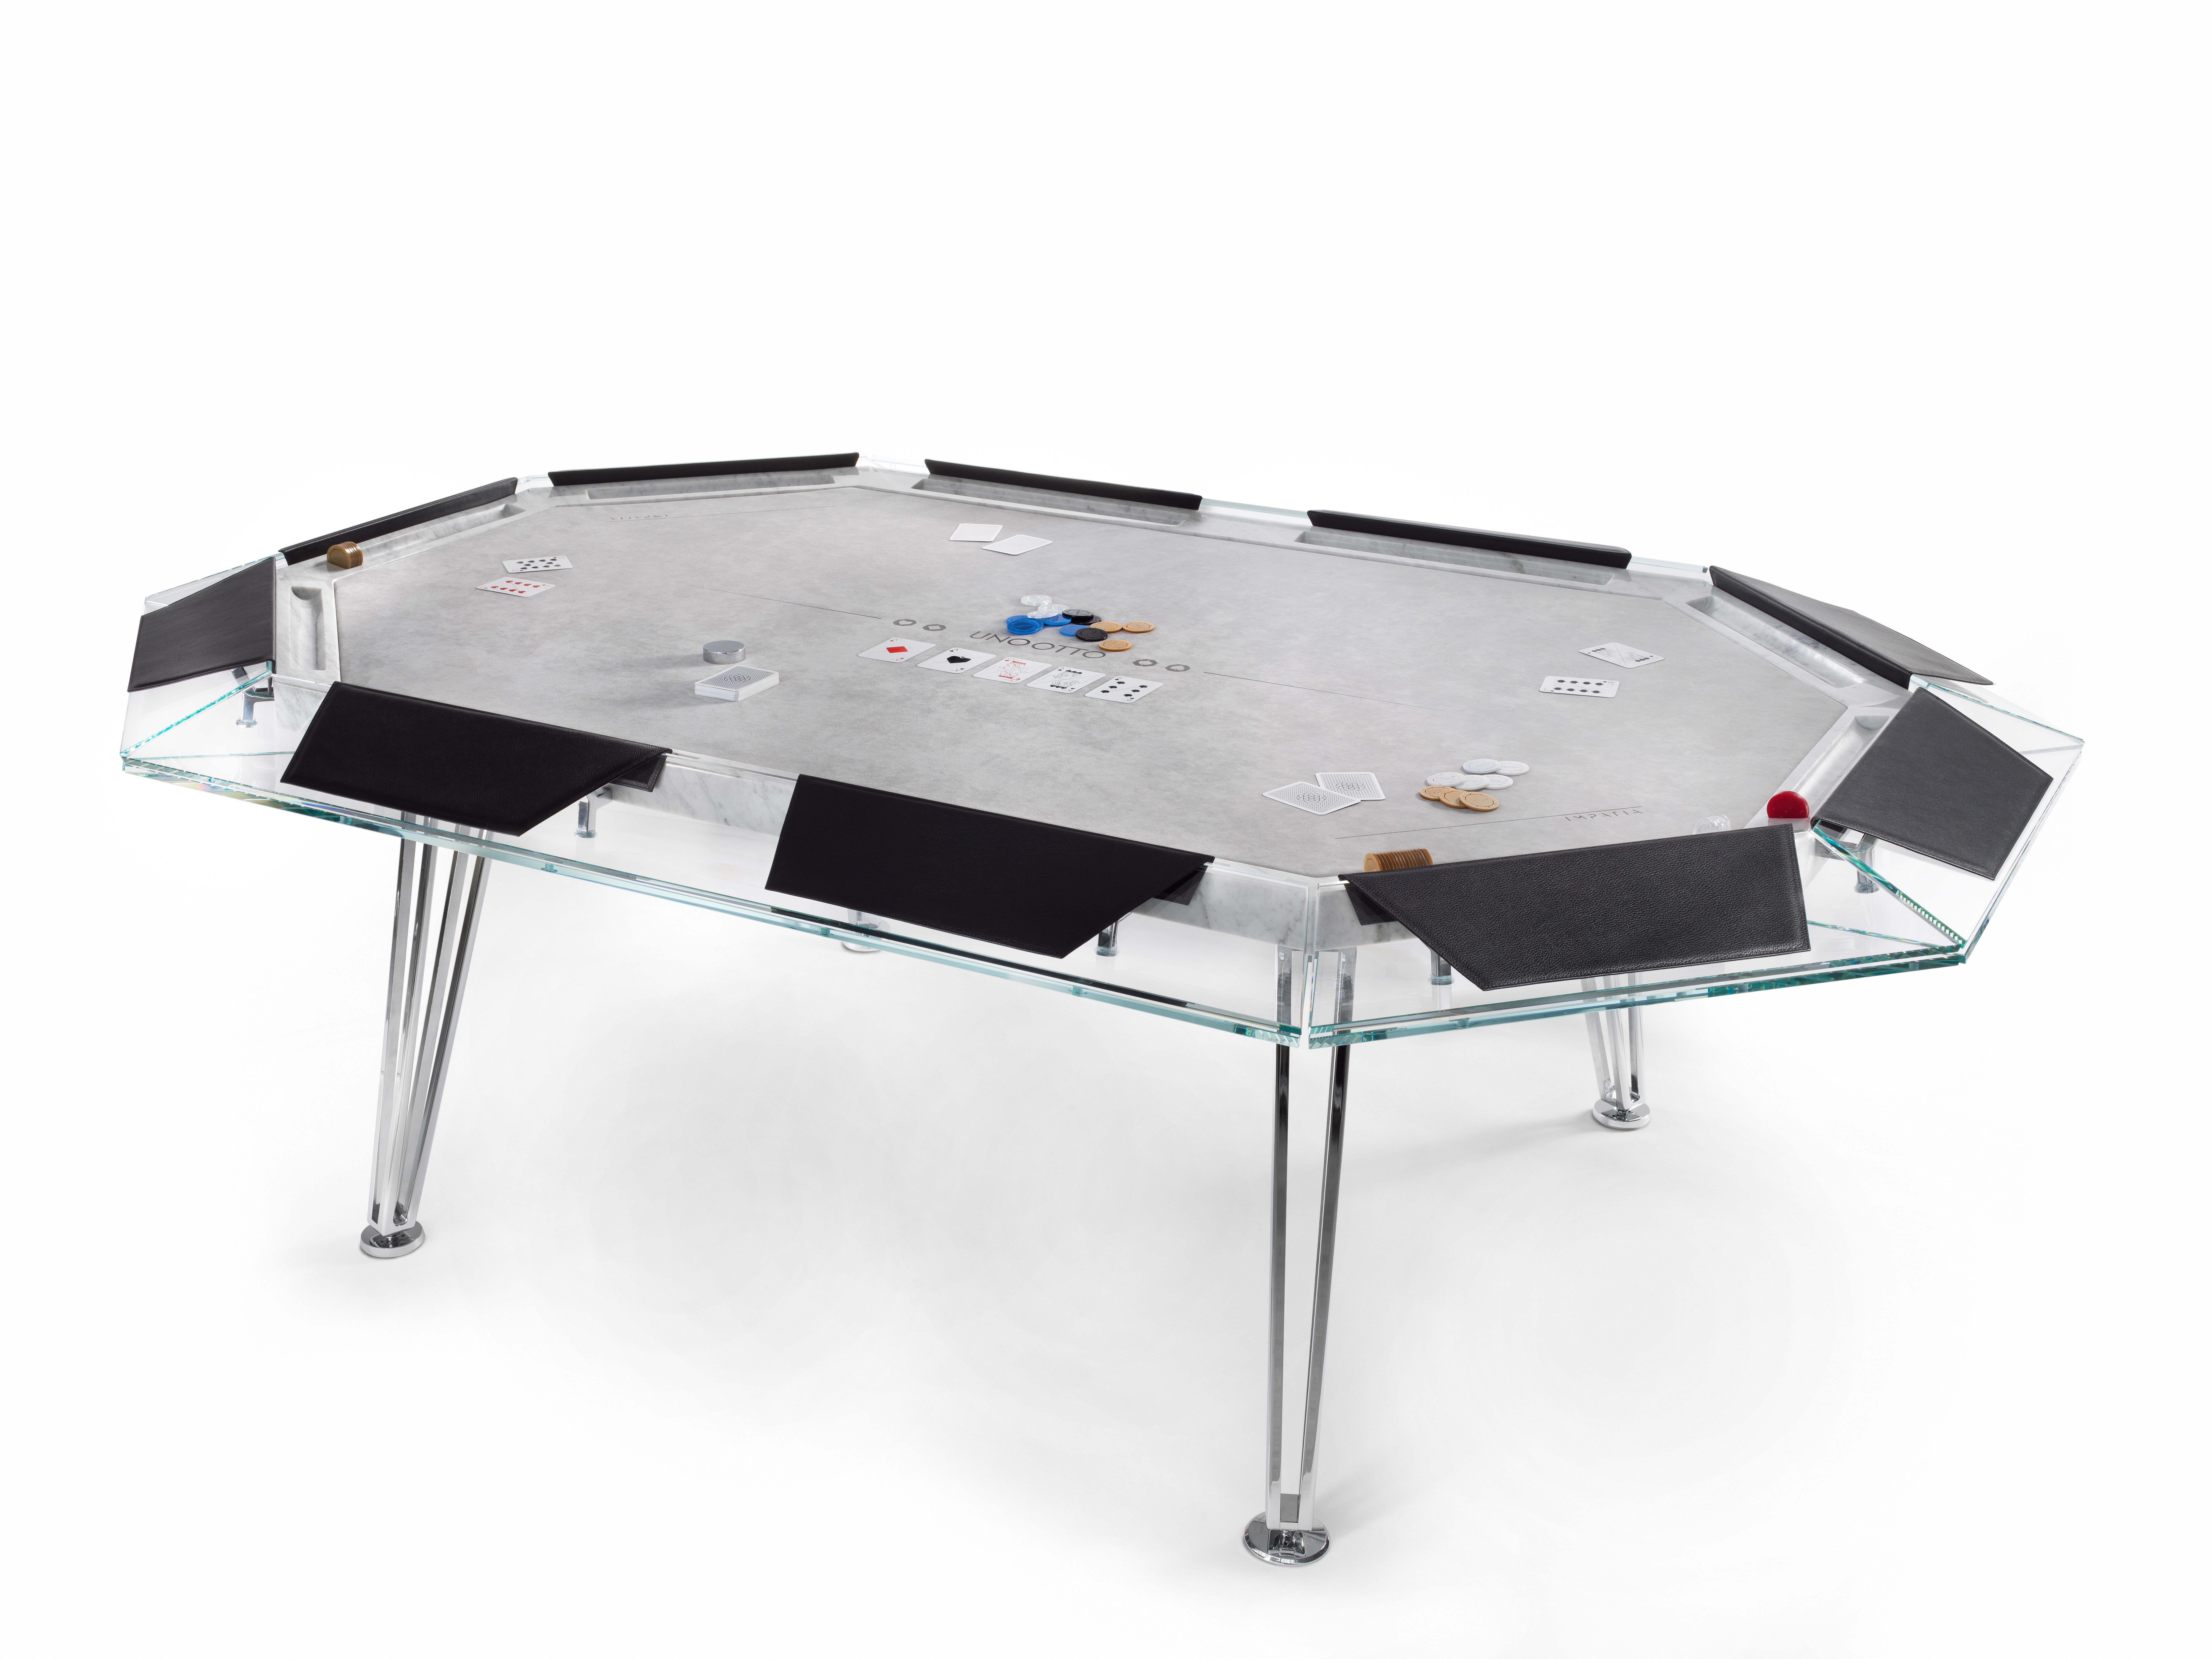 Italian Unootto Marble Edition, 10 Player Poker Table, by Impatia